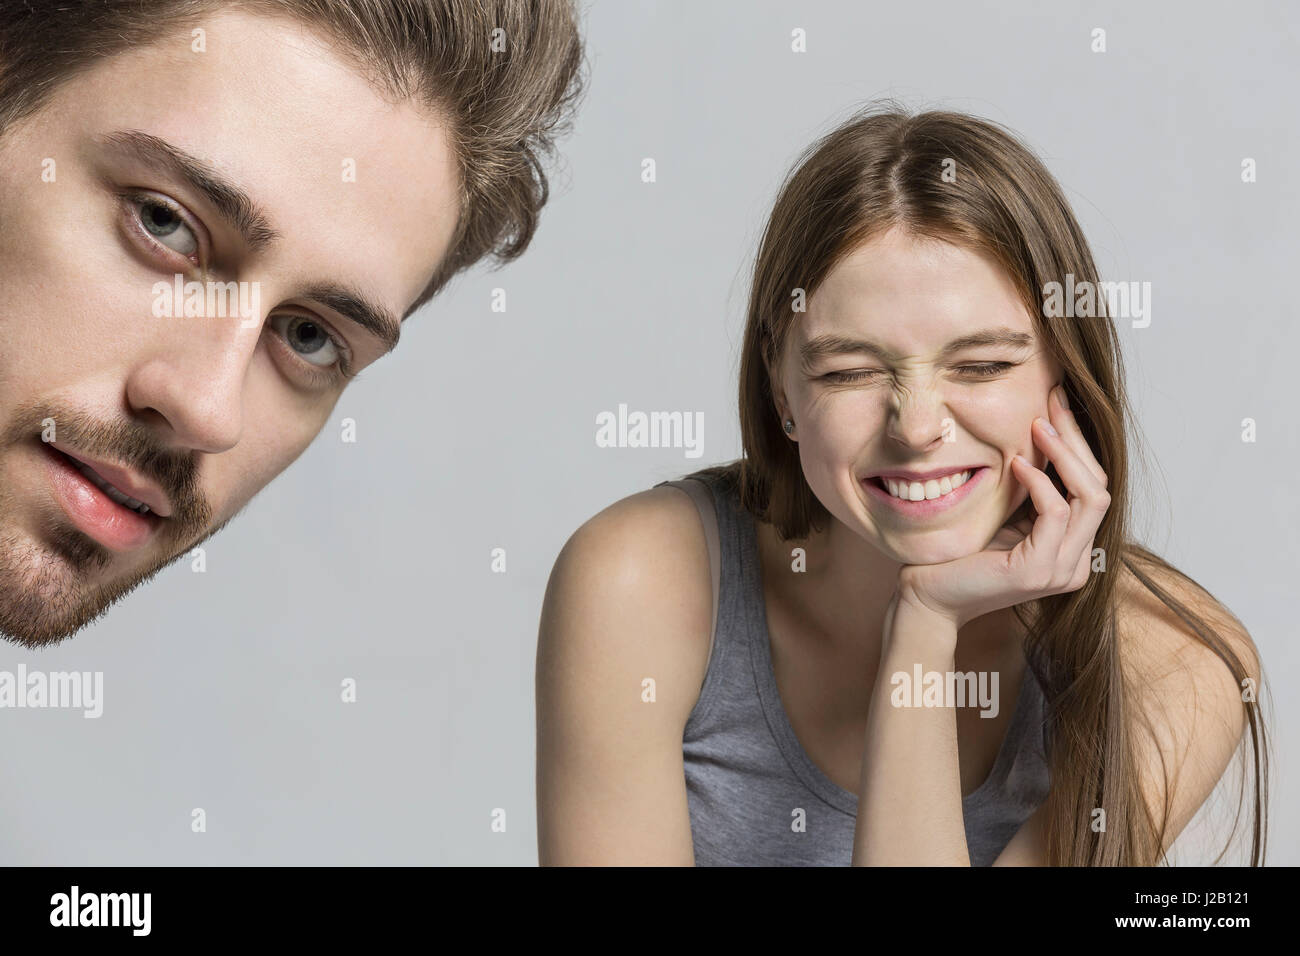 Portrait of man with cheerful girlfriend against gray background Stock Photo